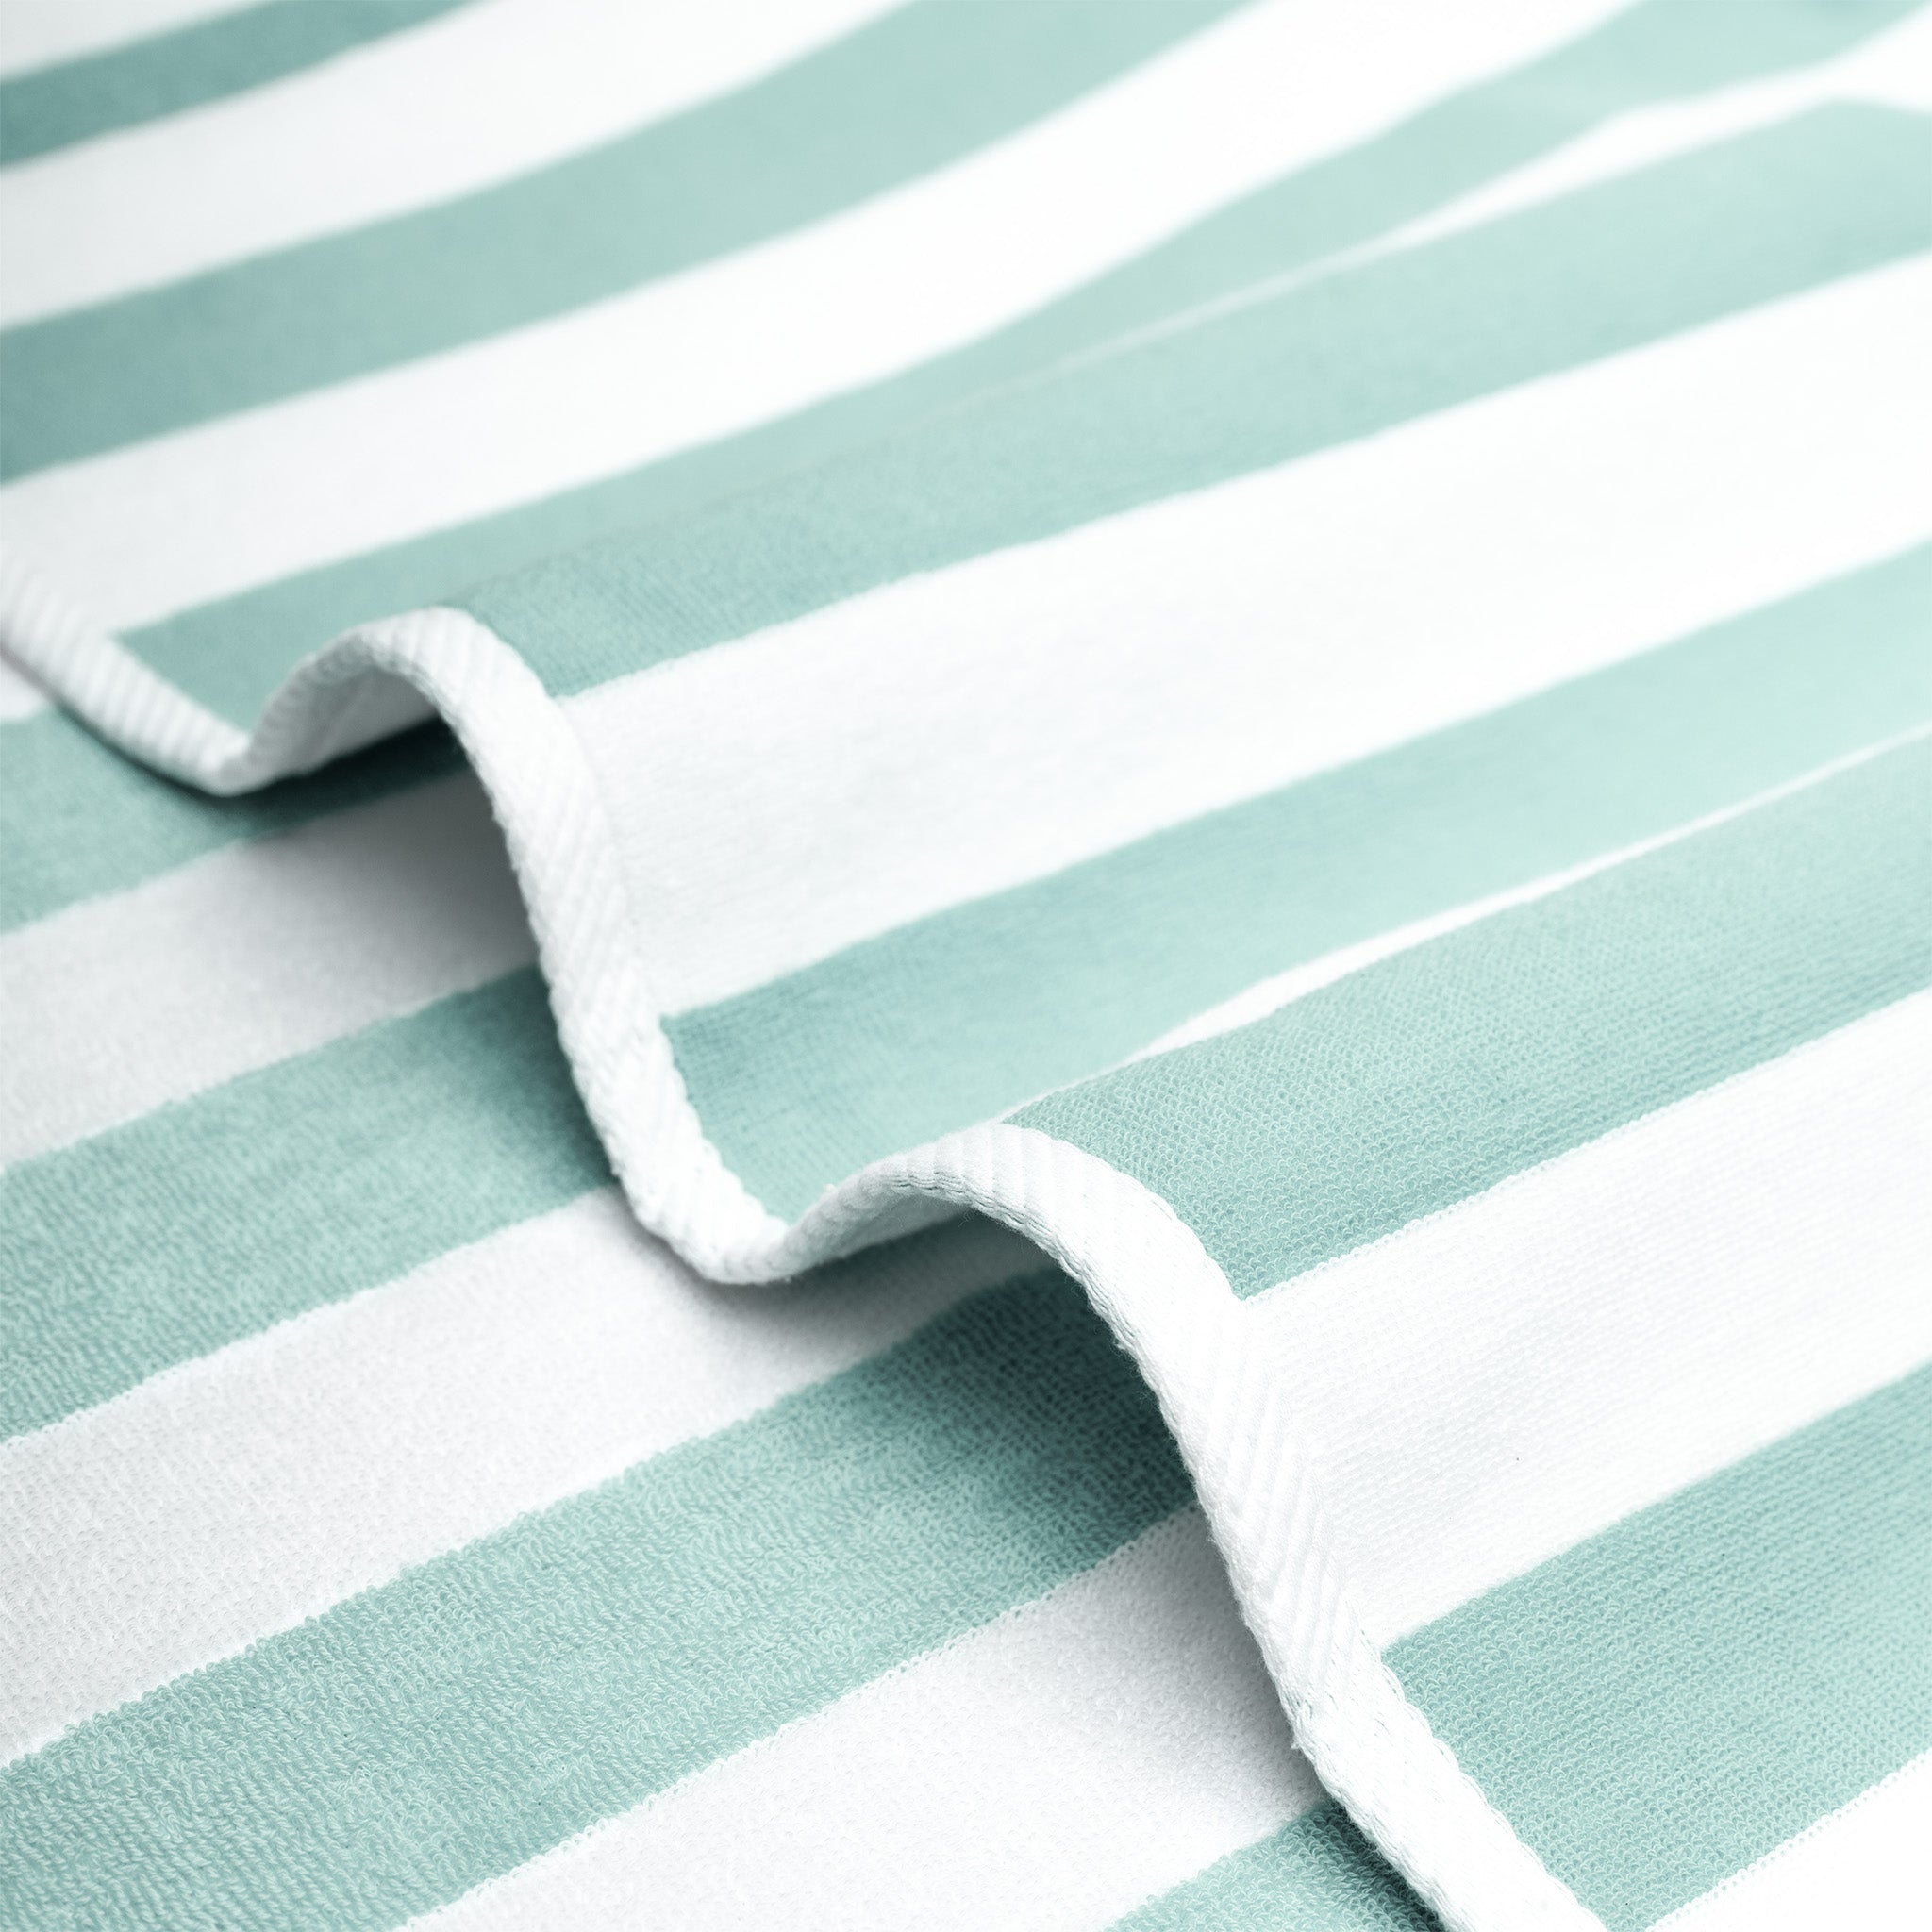 American Soft Linen 100% Cotton 4 Pack Beach Towels Cabana Striped Pool Towels -mint-5